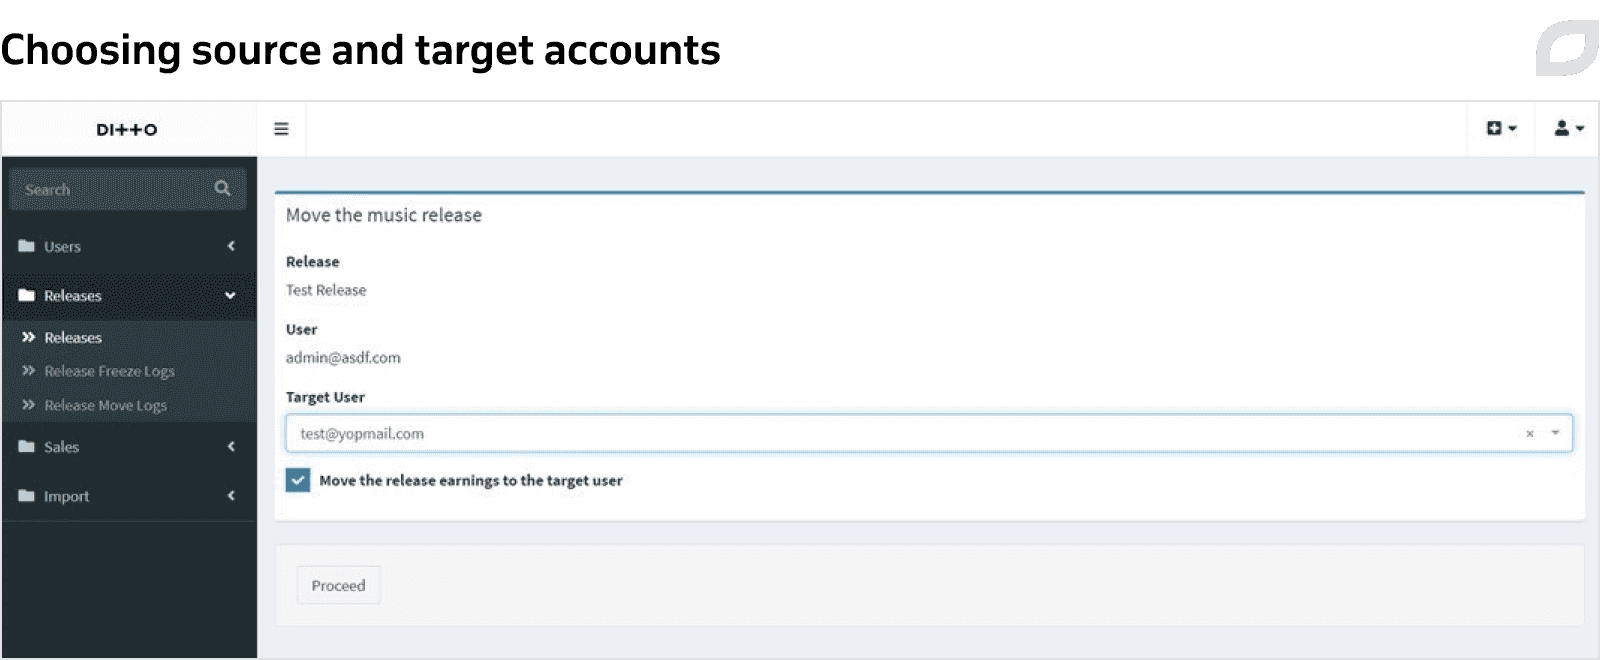 Choosing source and target accounts